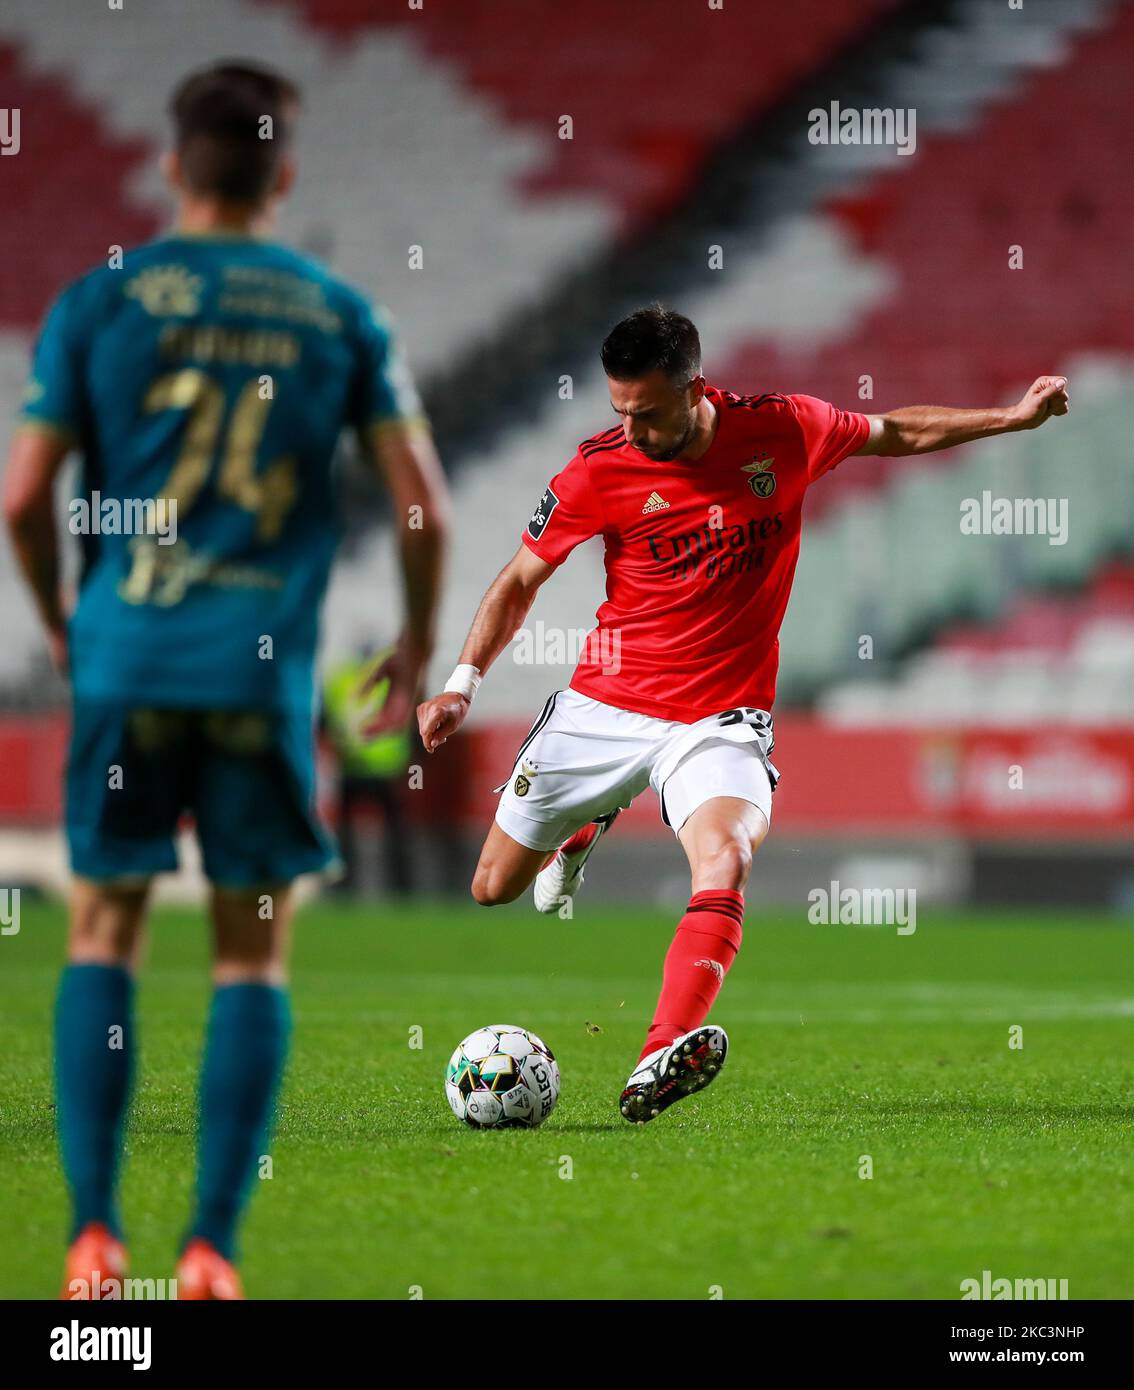 Andreas Samaris of SL Benfica in action during the Portuguese League 2020/21 match between SL Benfica and SC Braga, at Luz Stadium in Lisbon on November 8, 2020. (Photo by Paulo Nascimento/NurPhoto) Stock Photo